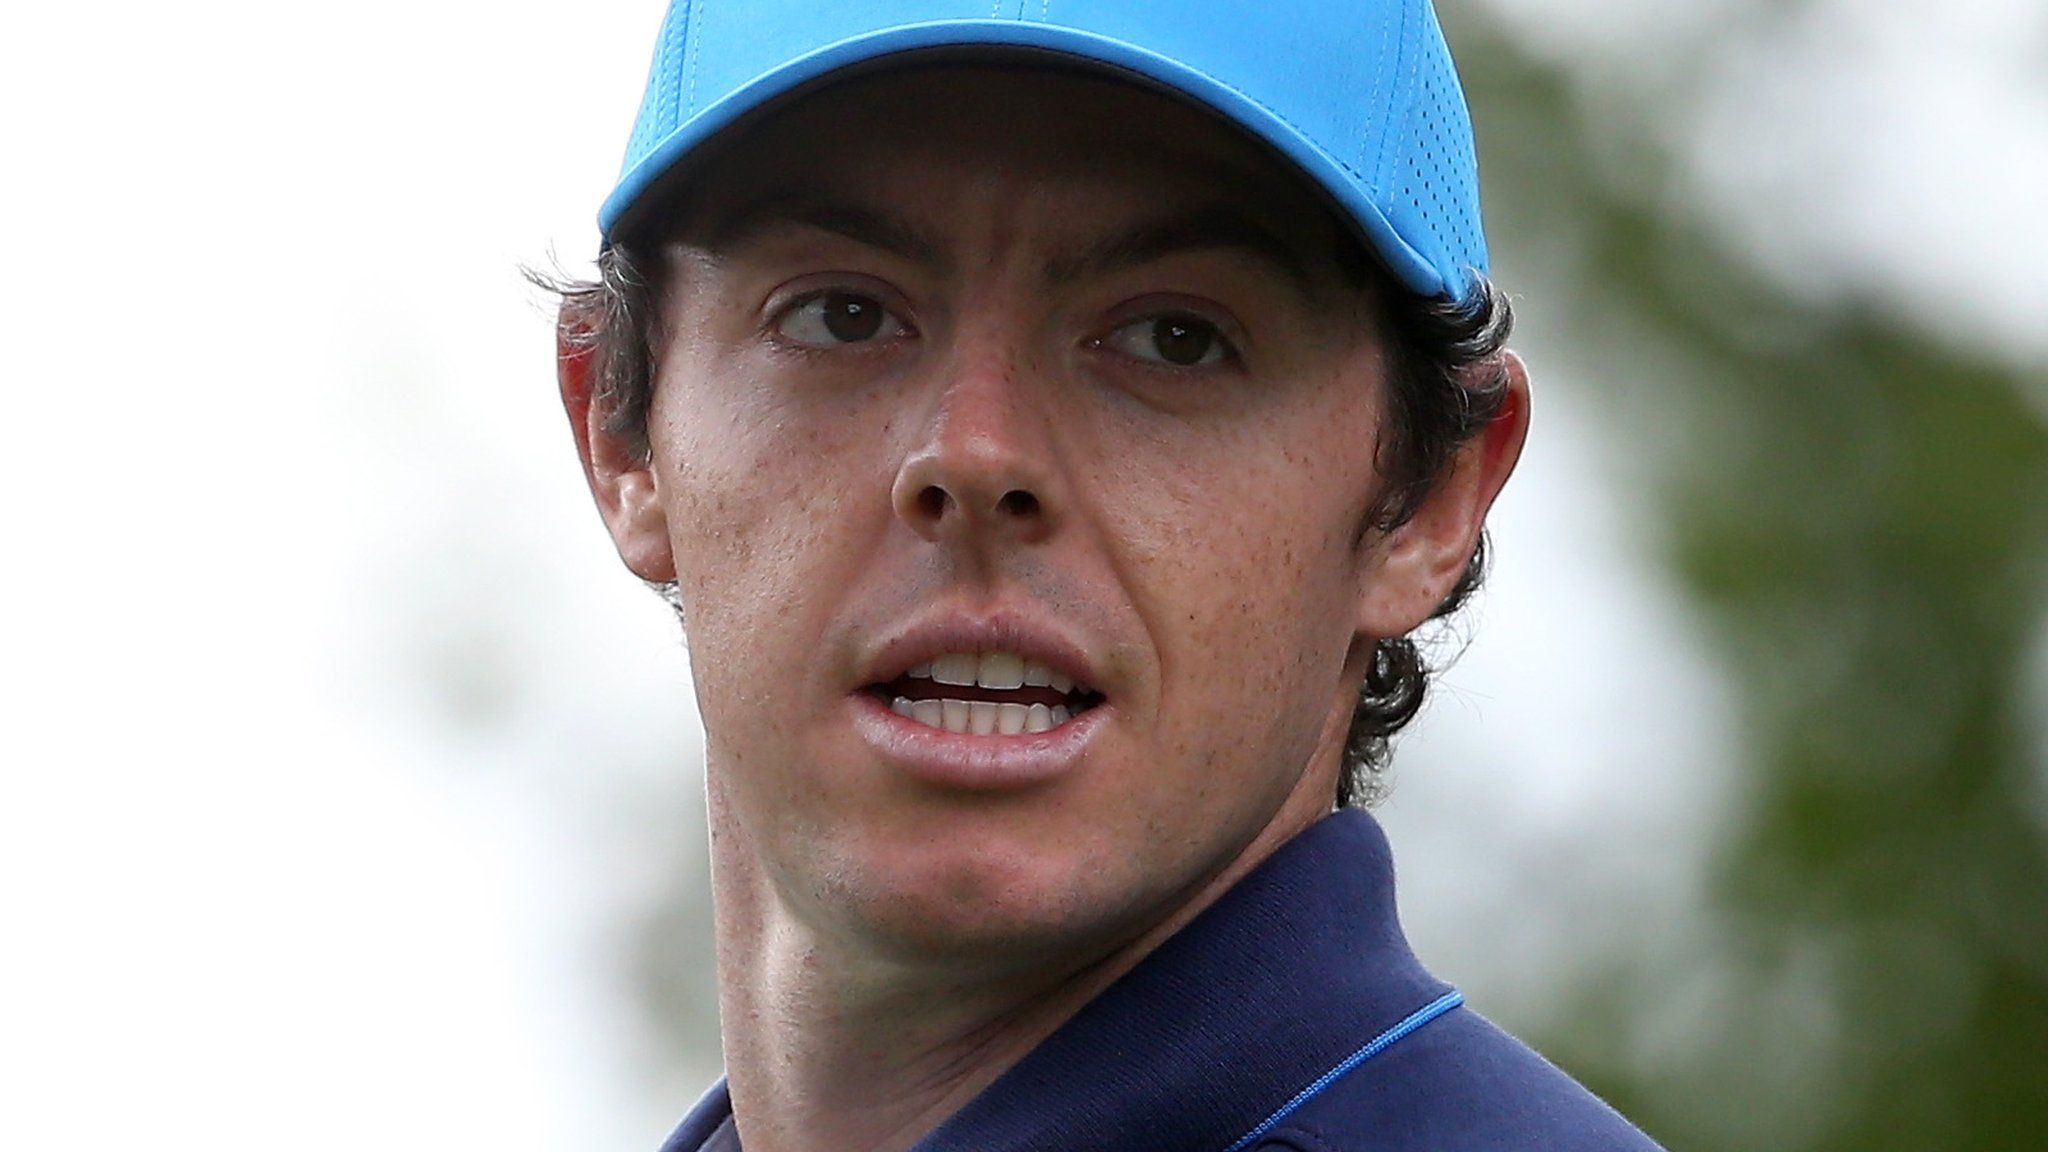 Rory McIlroy is concerned that golf might be dropped from the Olympics after the 2020 Games in Tokyo